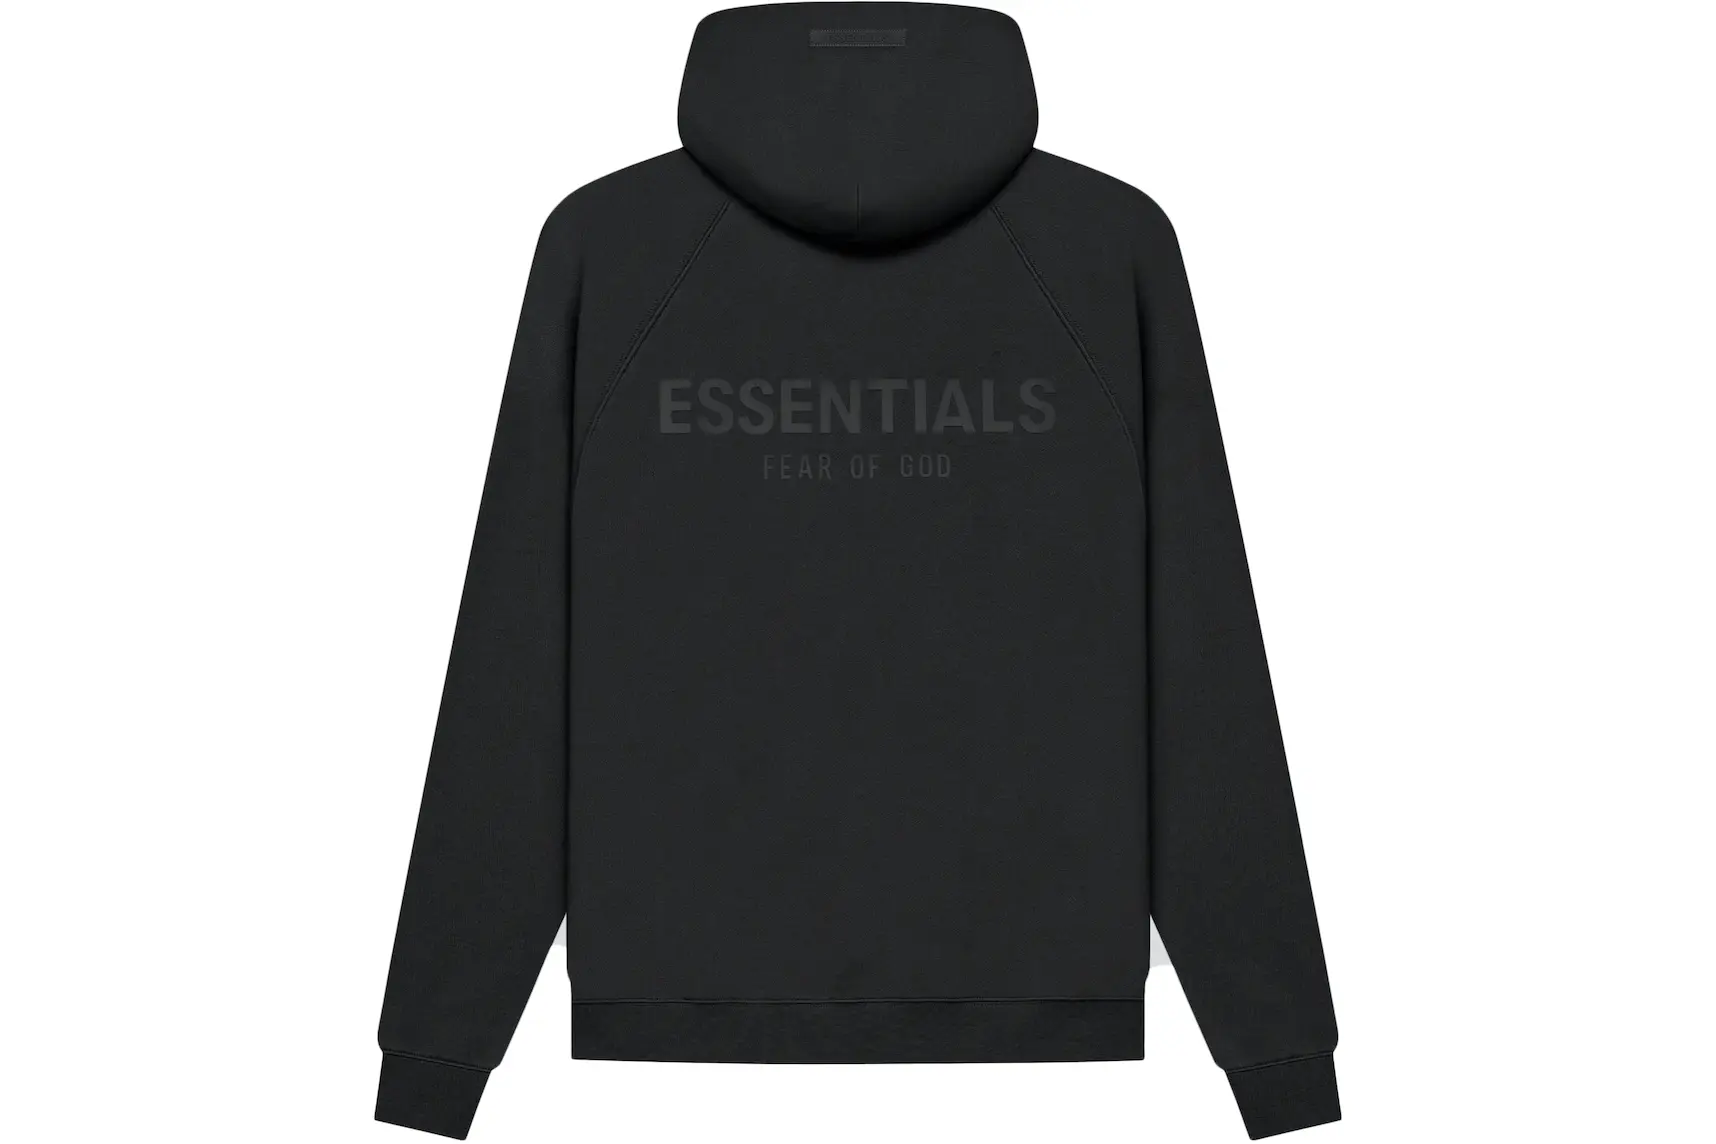 Fear of God Essentials Pull-Over Hoodie (Black SS21)